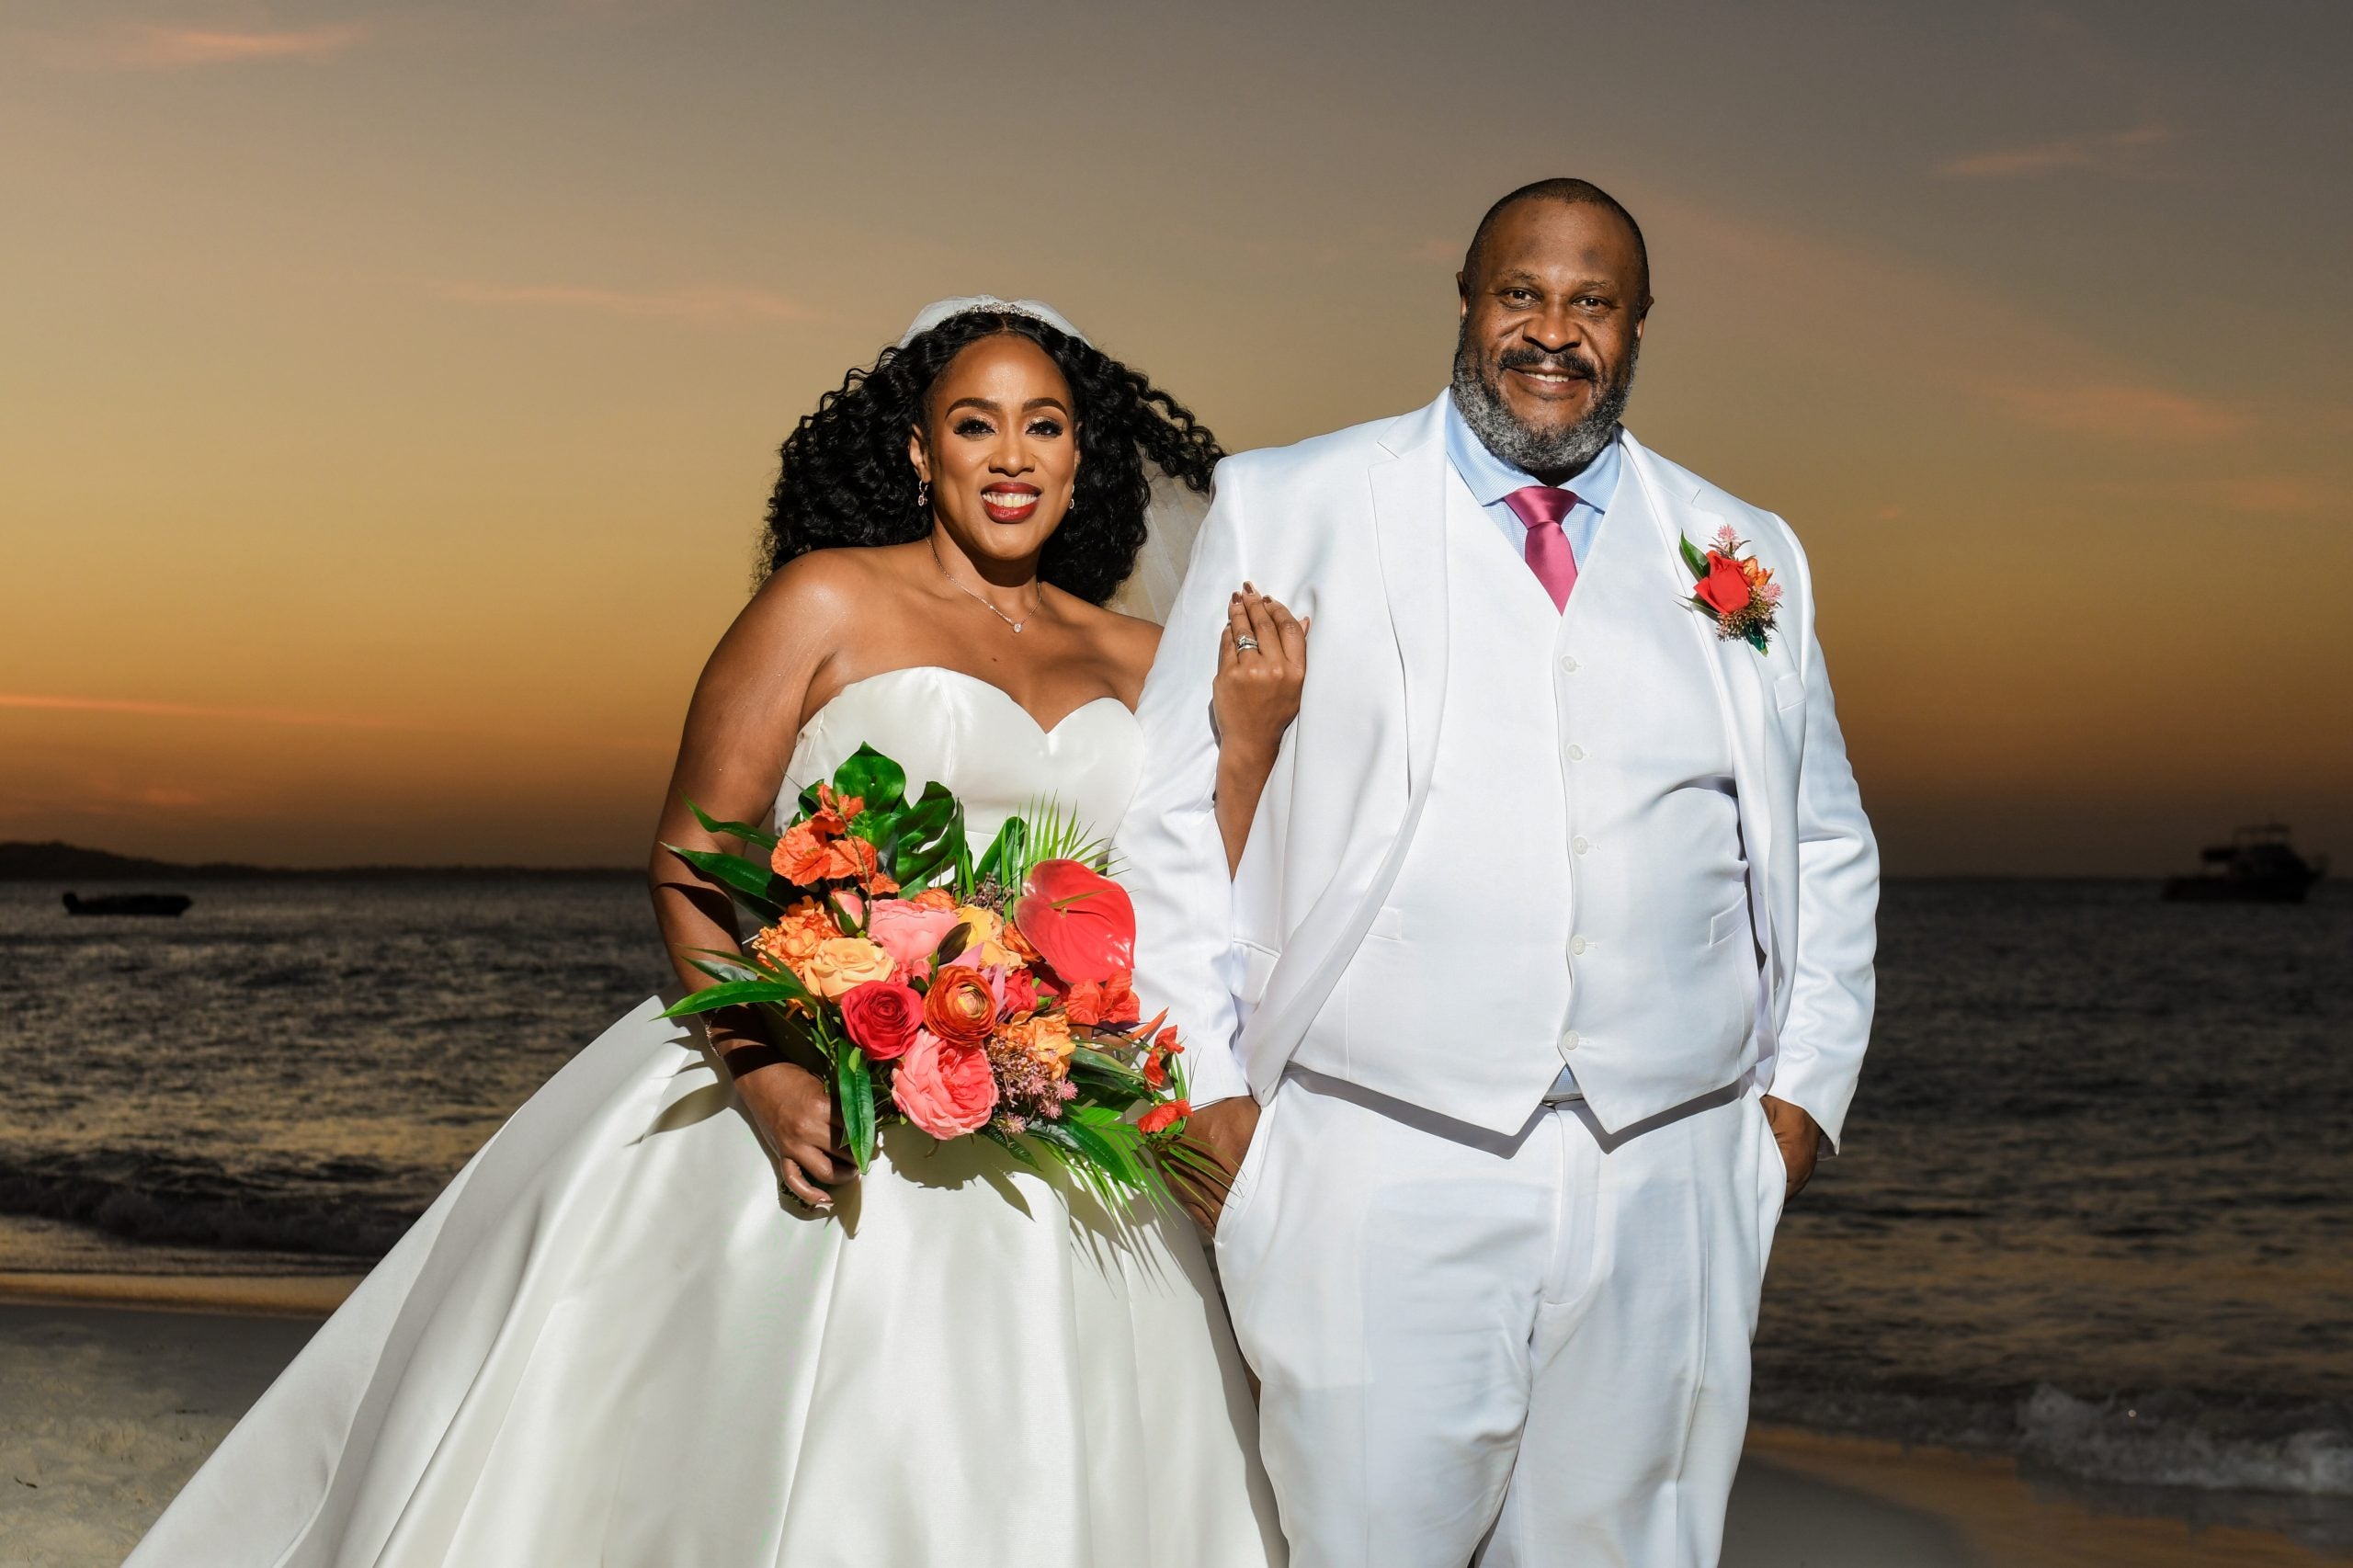 Bridal Bliss: Tomika And Michael Said 'I Do' In A Sunset Wedding On The Beach In Turks And Caicos